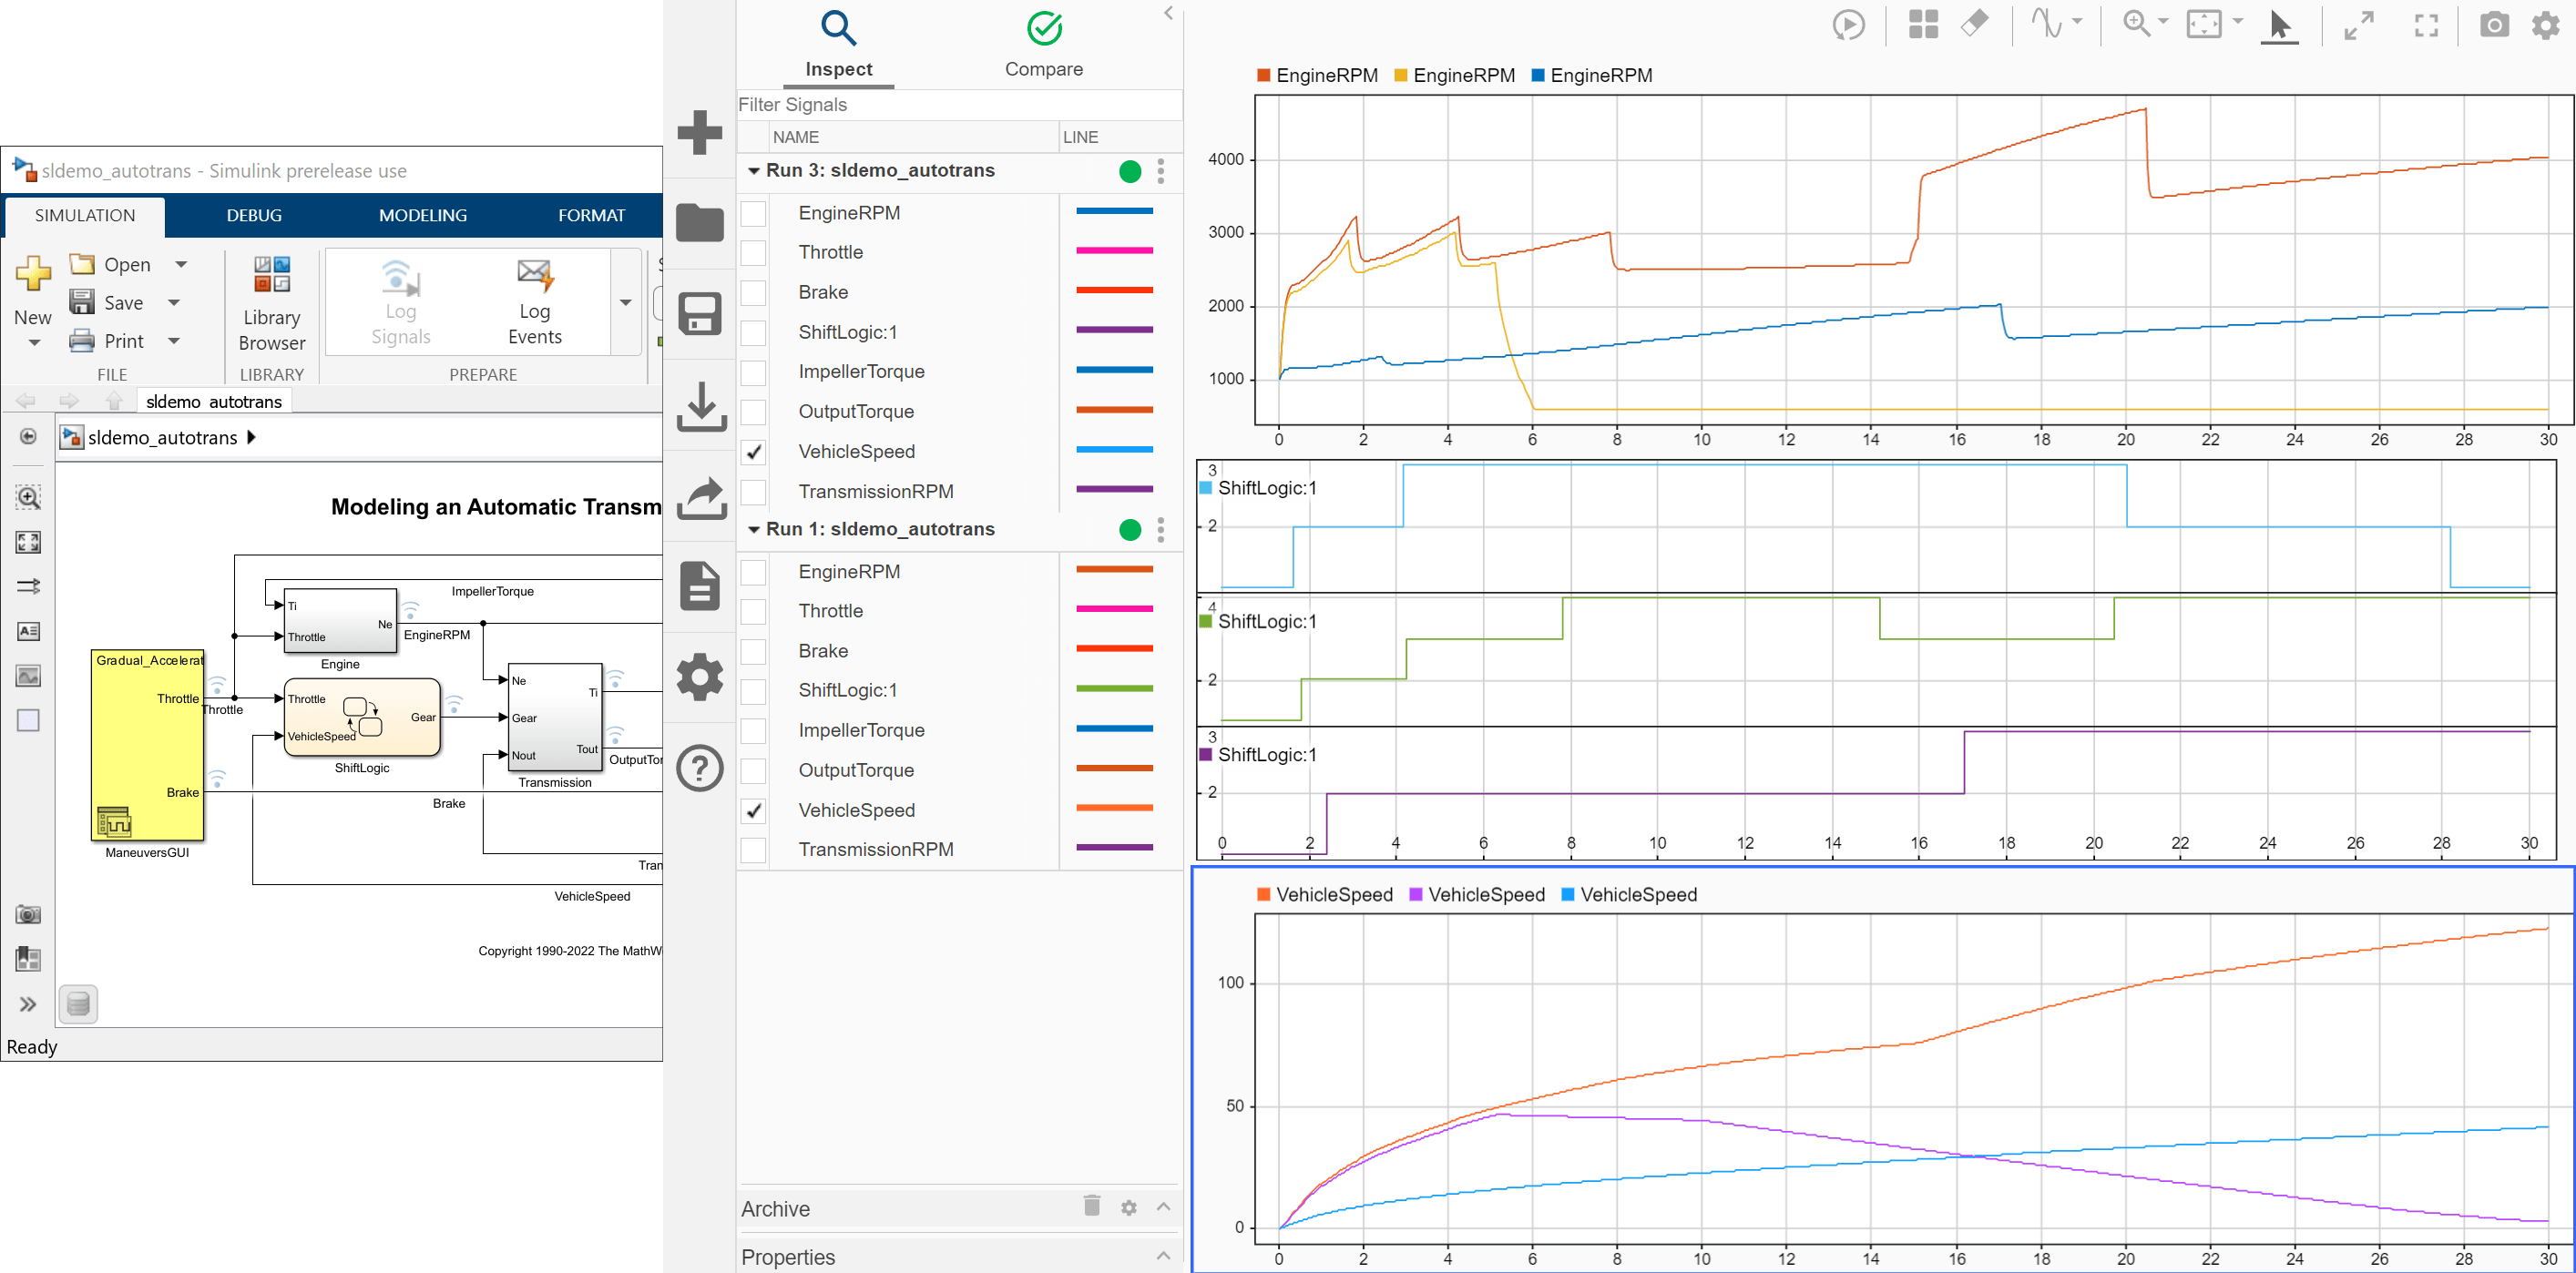 The Inspect pane of the Simulation Data Inspector shows three subplots. The subplots show time plots of data gathered from three runs of the model sldemo_autotrans. The first subplot shows the EngineRPM signals from all three runs. The second subplot shows the ShiftLogic signals from all three runs. The third subplot shows the VehicleSpeed signal from all three runs.